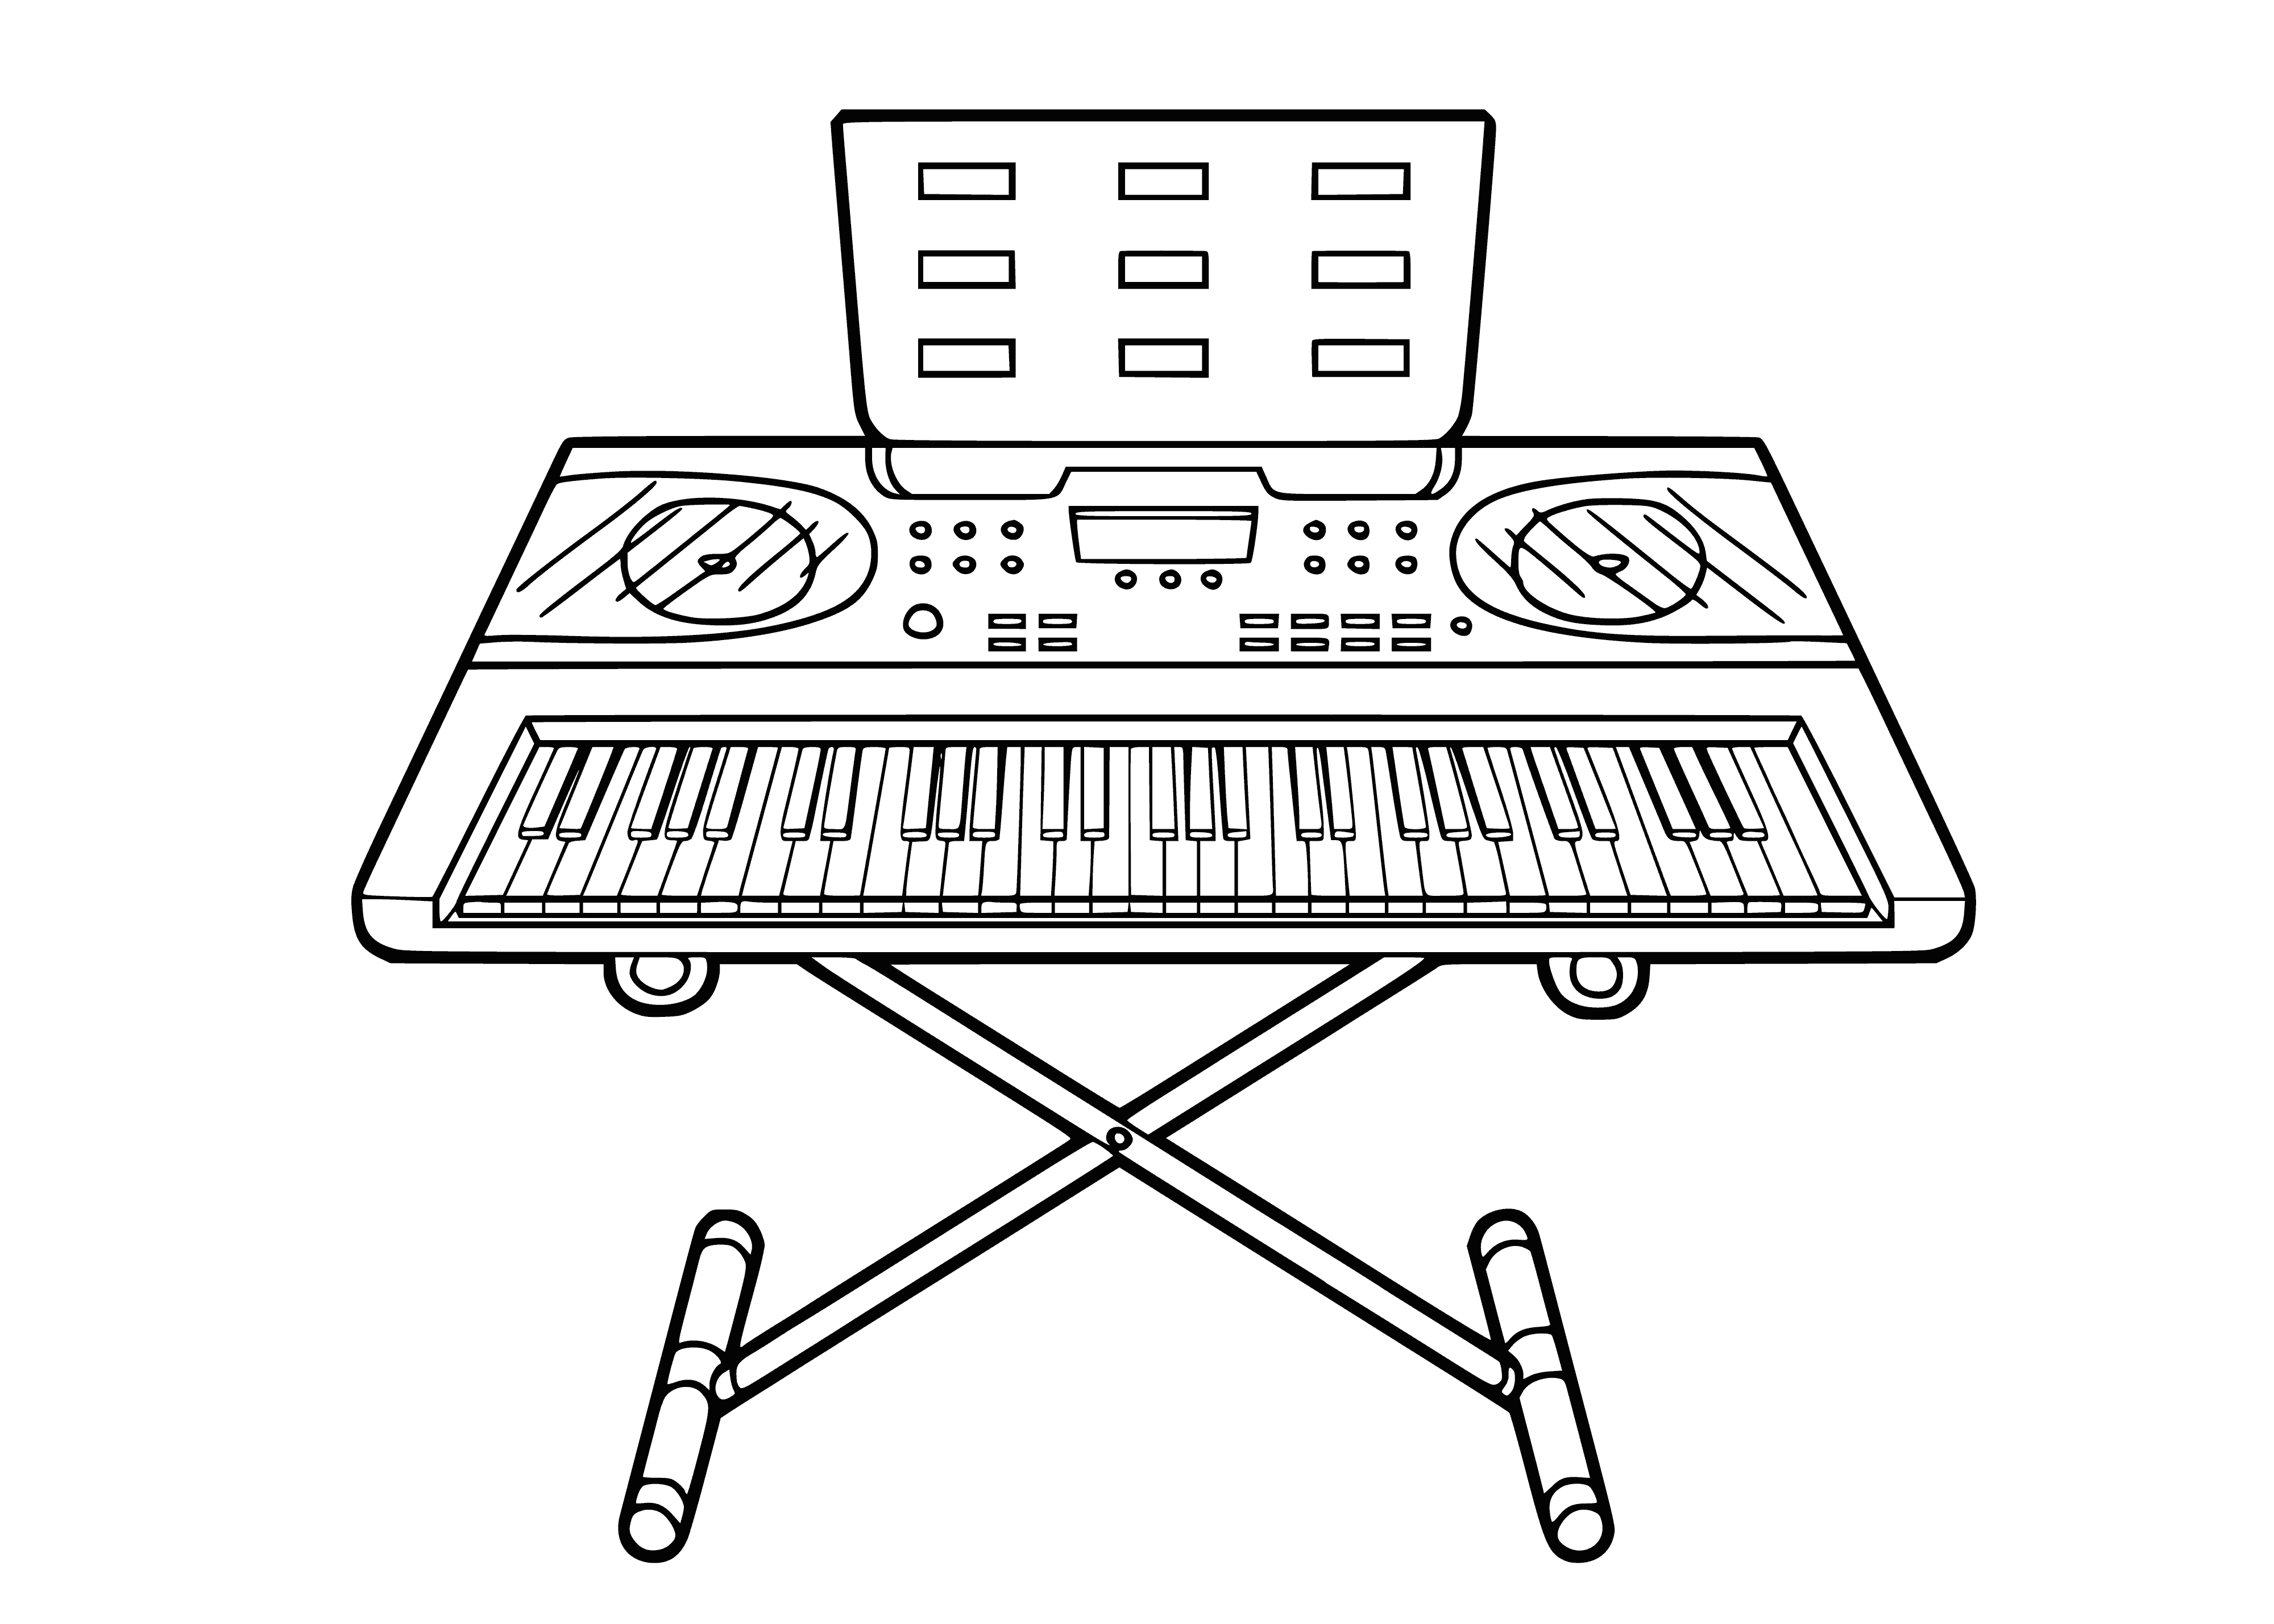 coloring page: Music synthesizer creates sound- can imitate other instruments or create new sounds- often used in electronic music.